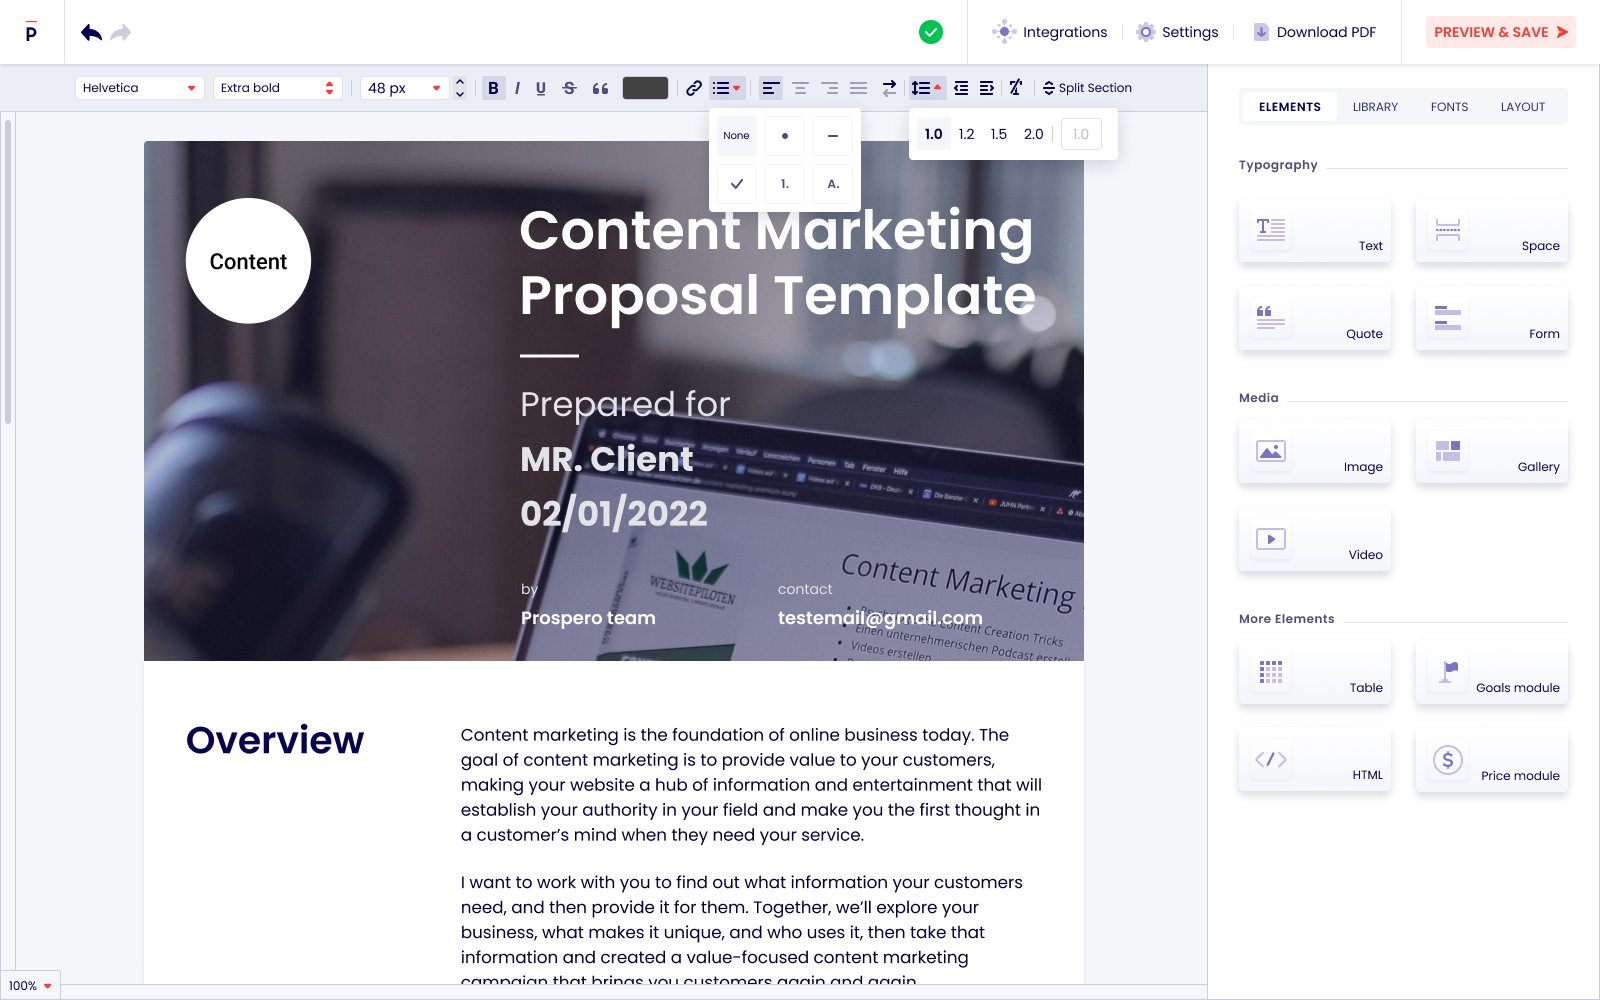 Customise your proposal templates easily by dragging and dropping different elements